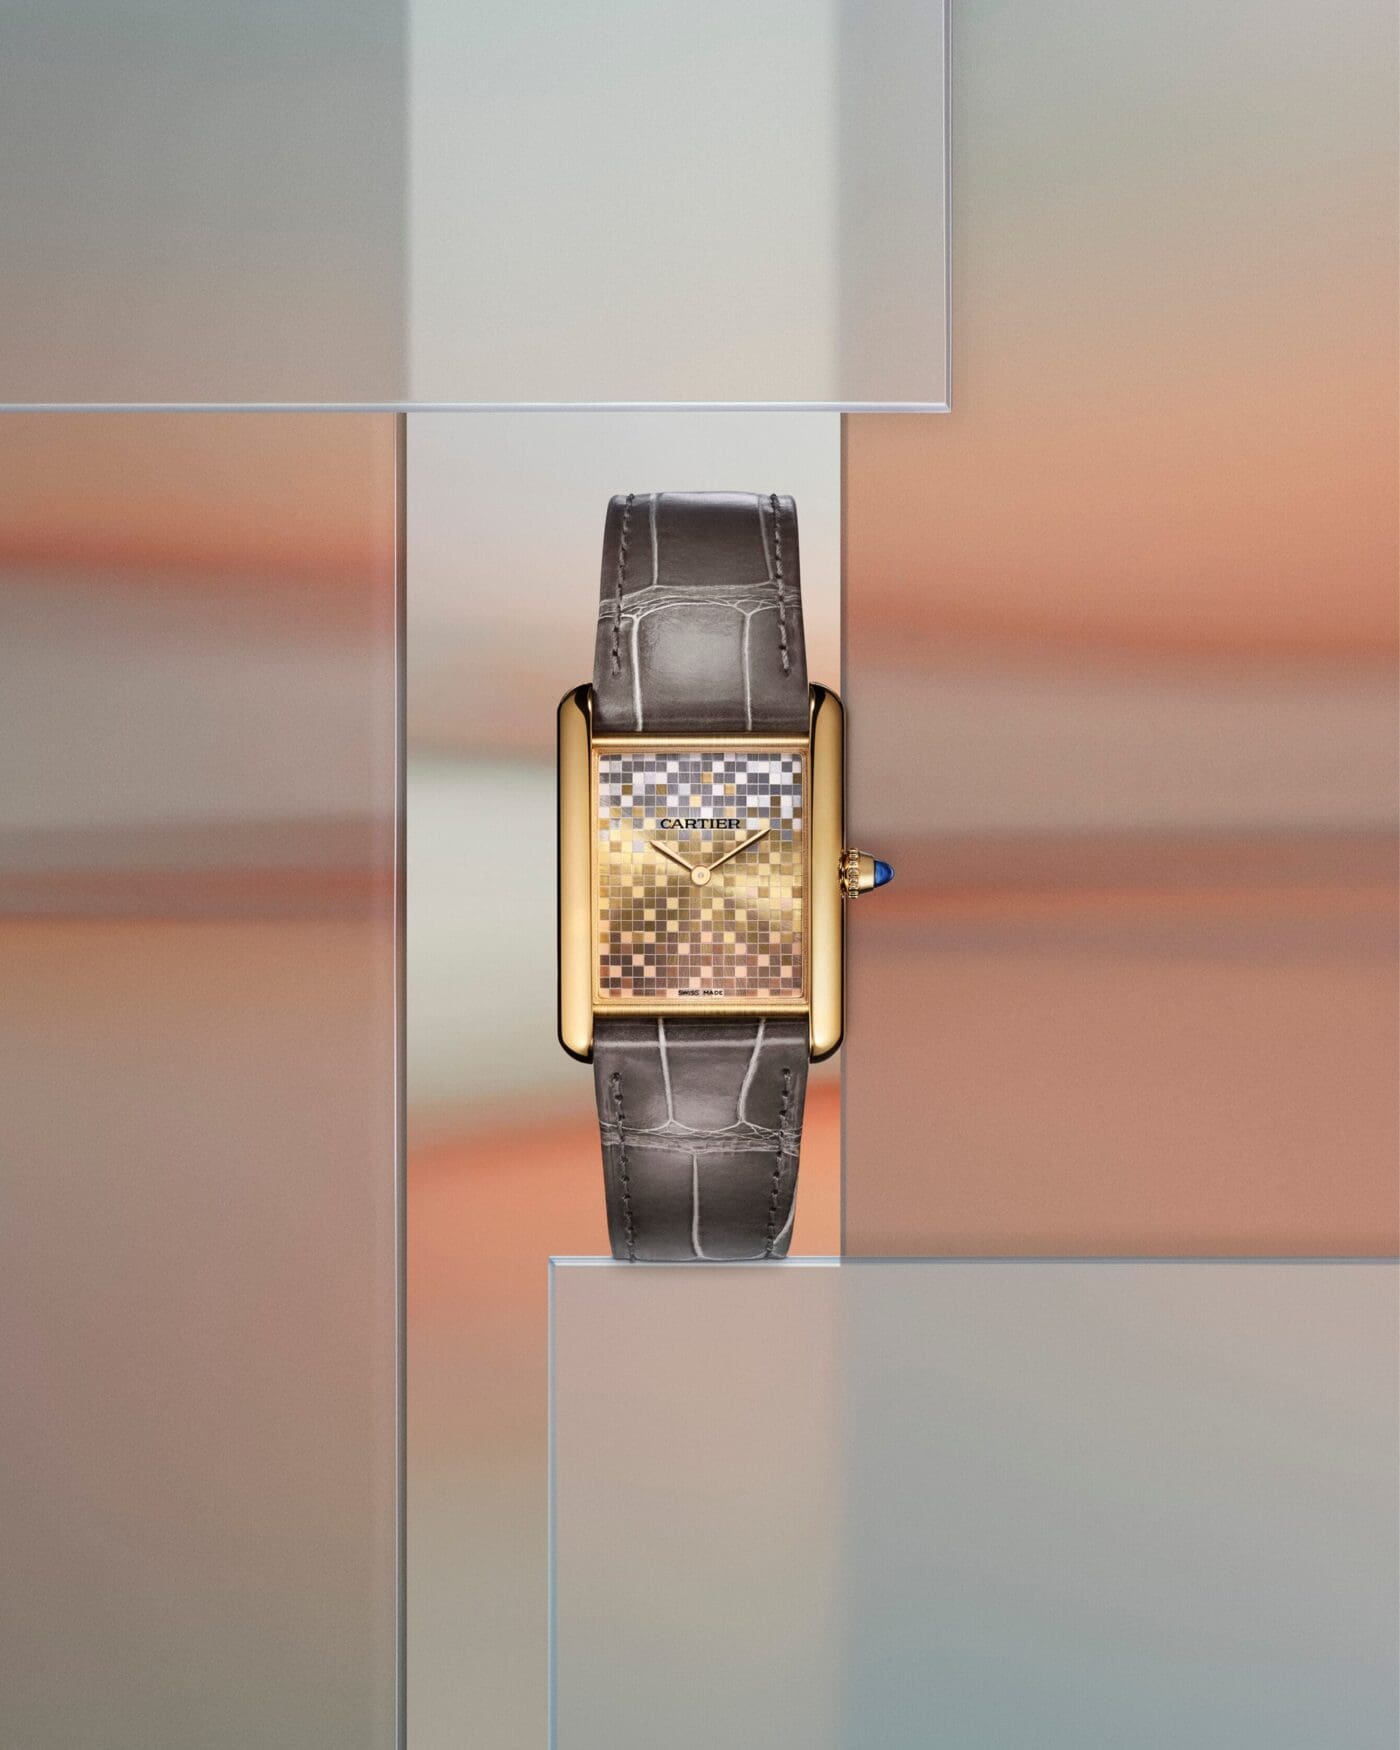 The new Cartier Tank Louis Cartier collection is all about mosaics, lacquer, and gold